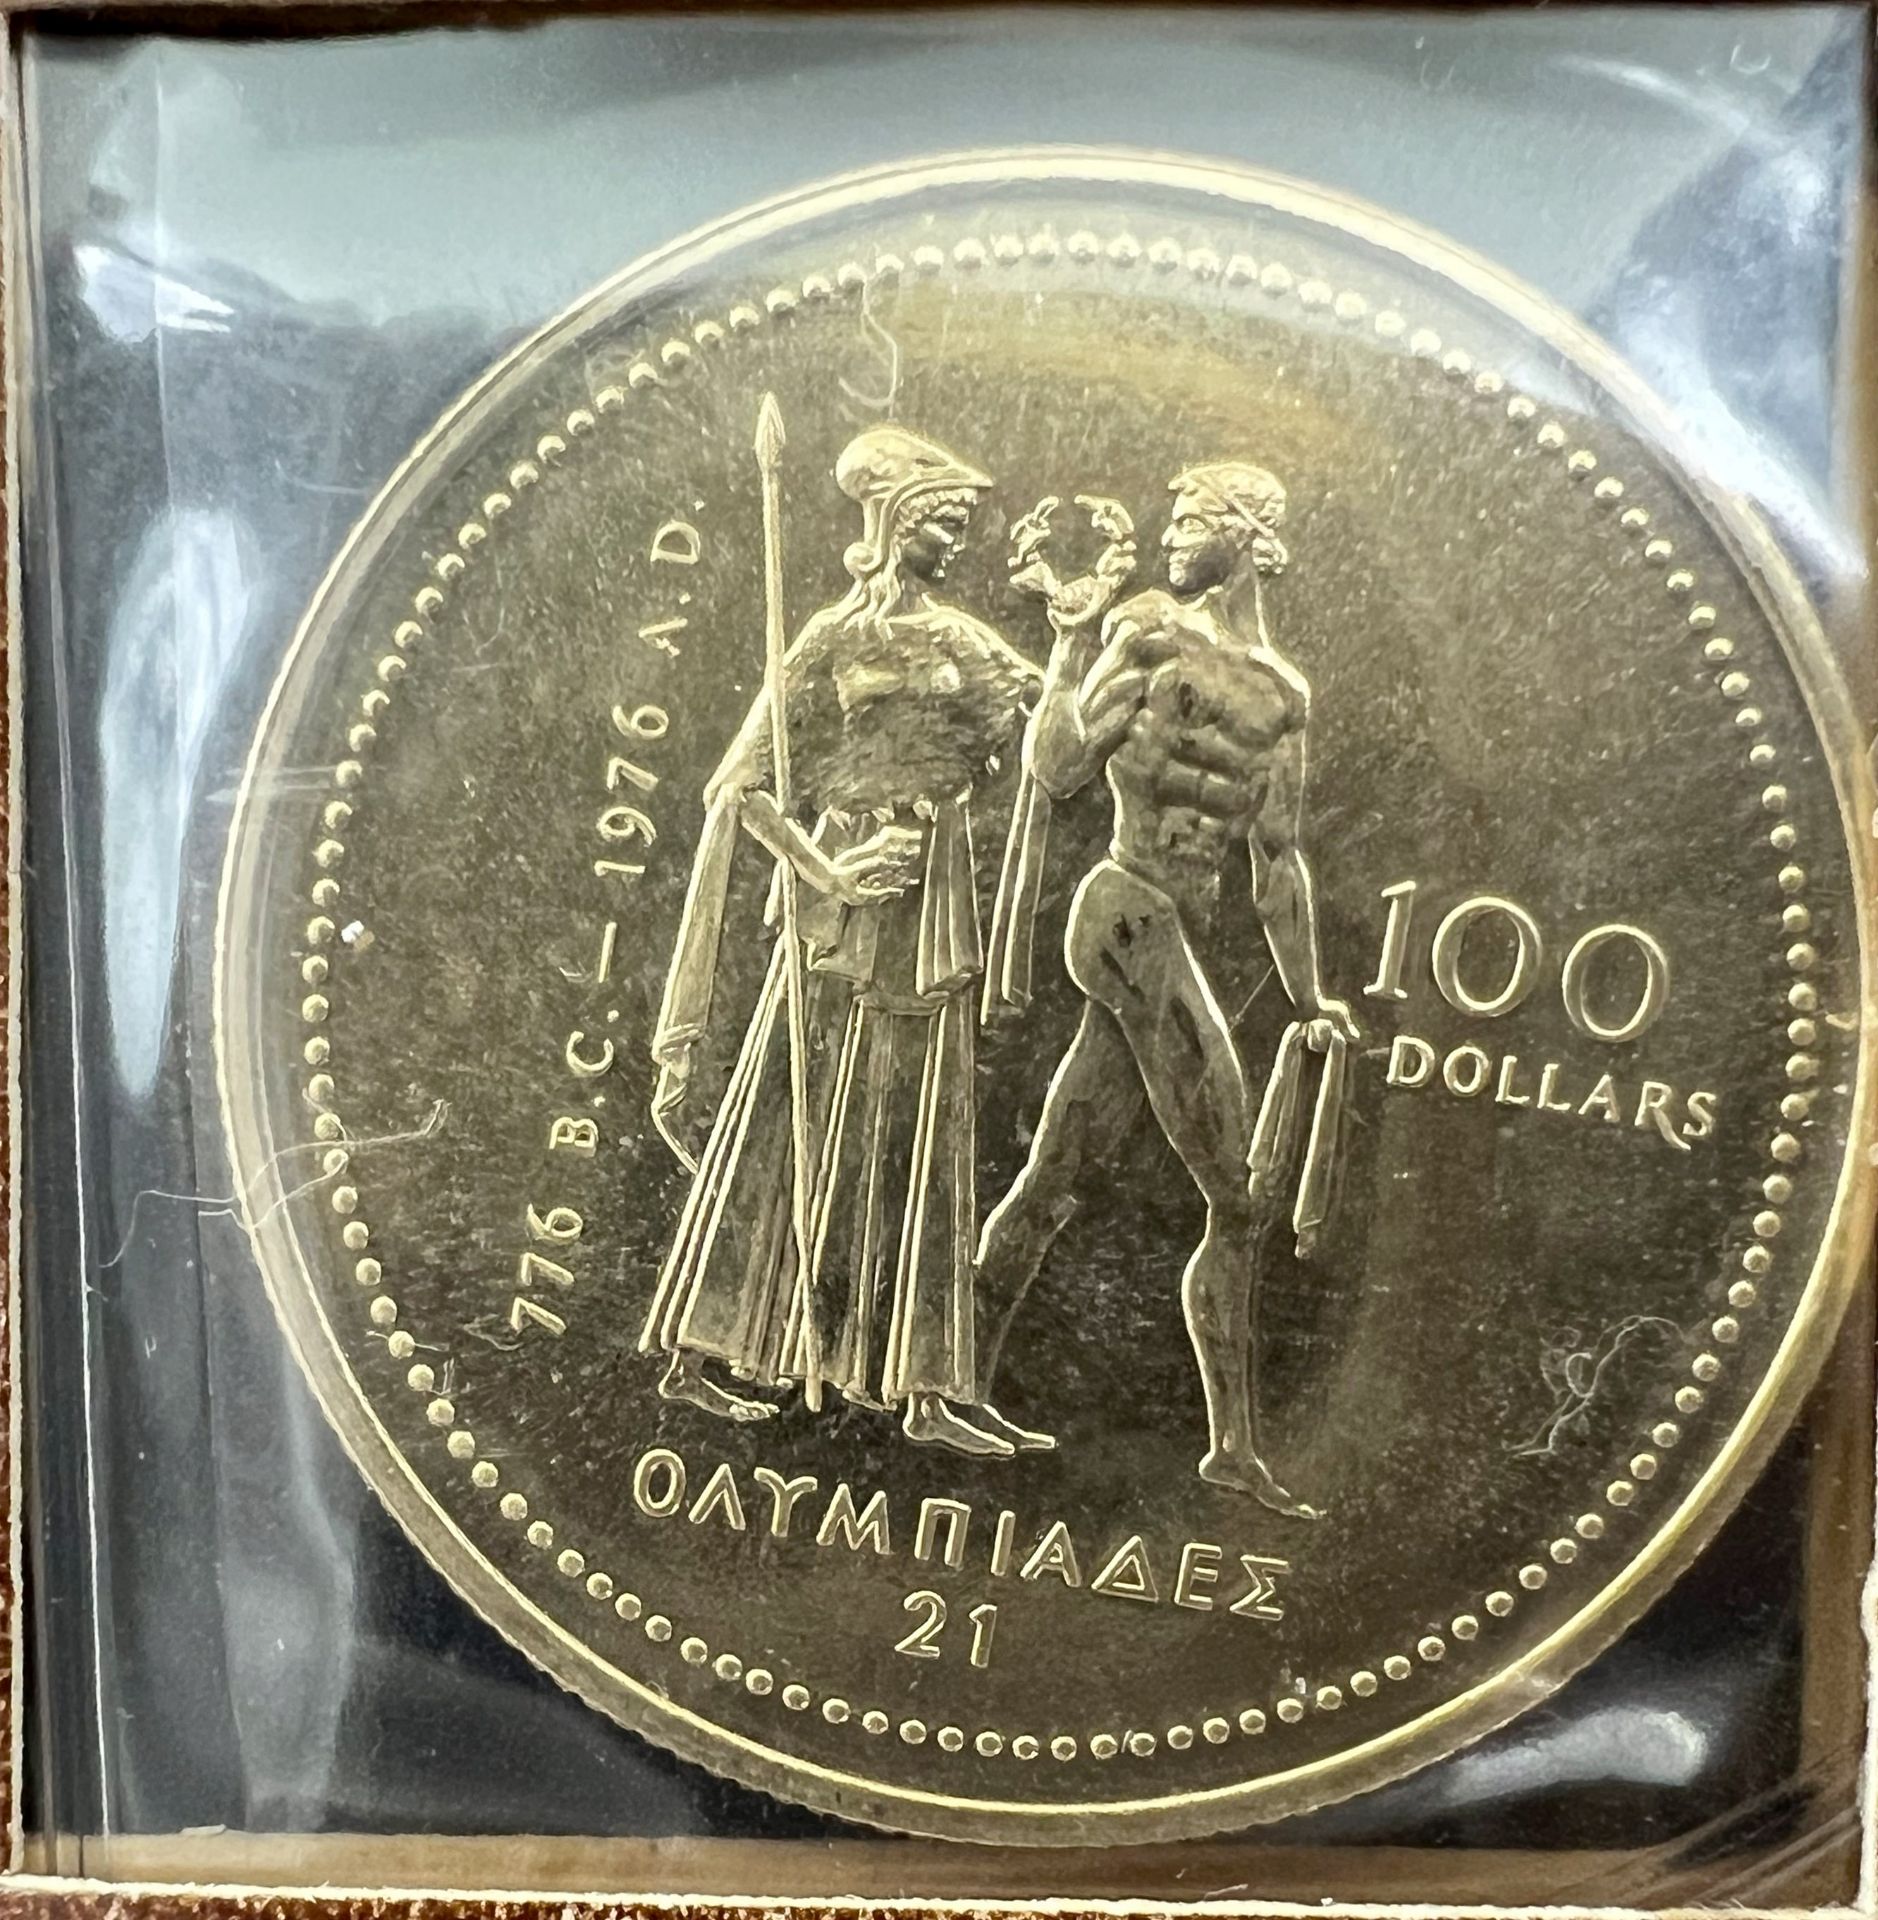 Gold coin 100 Dollars "21st Olympic Games in Montreal / Elizabeth II". Canada 1976. - Image 2 of 4